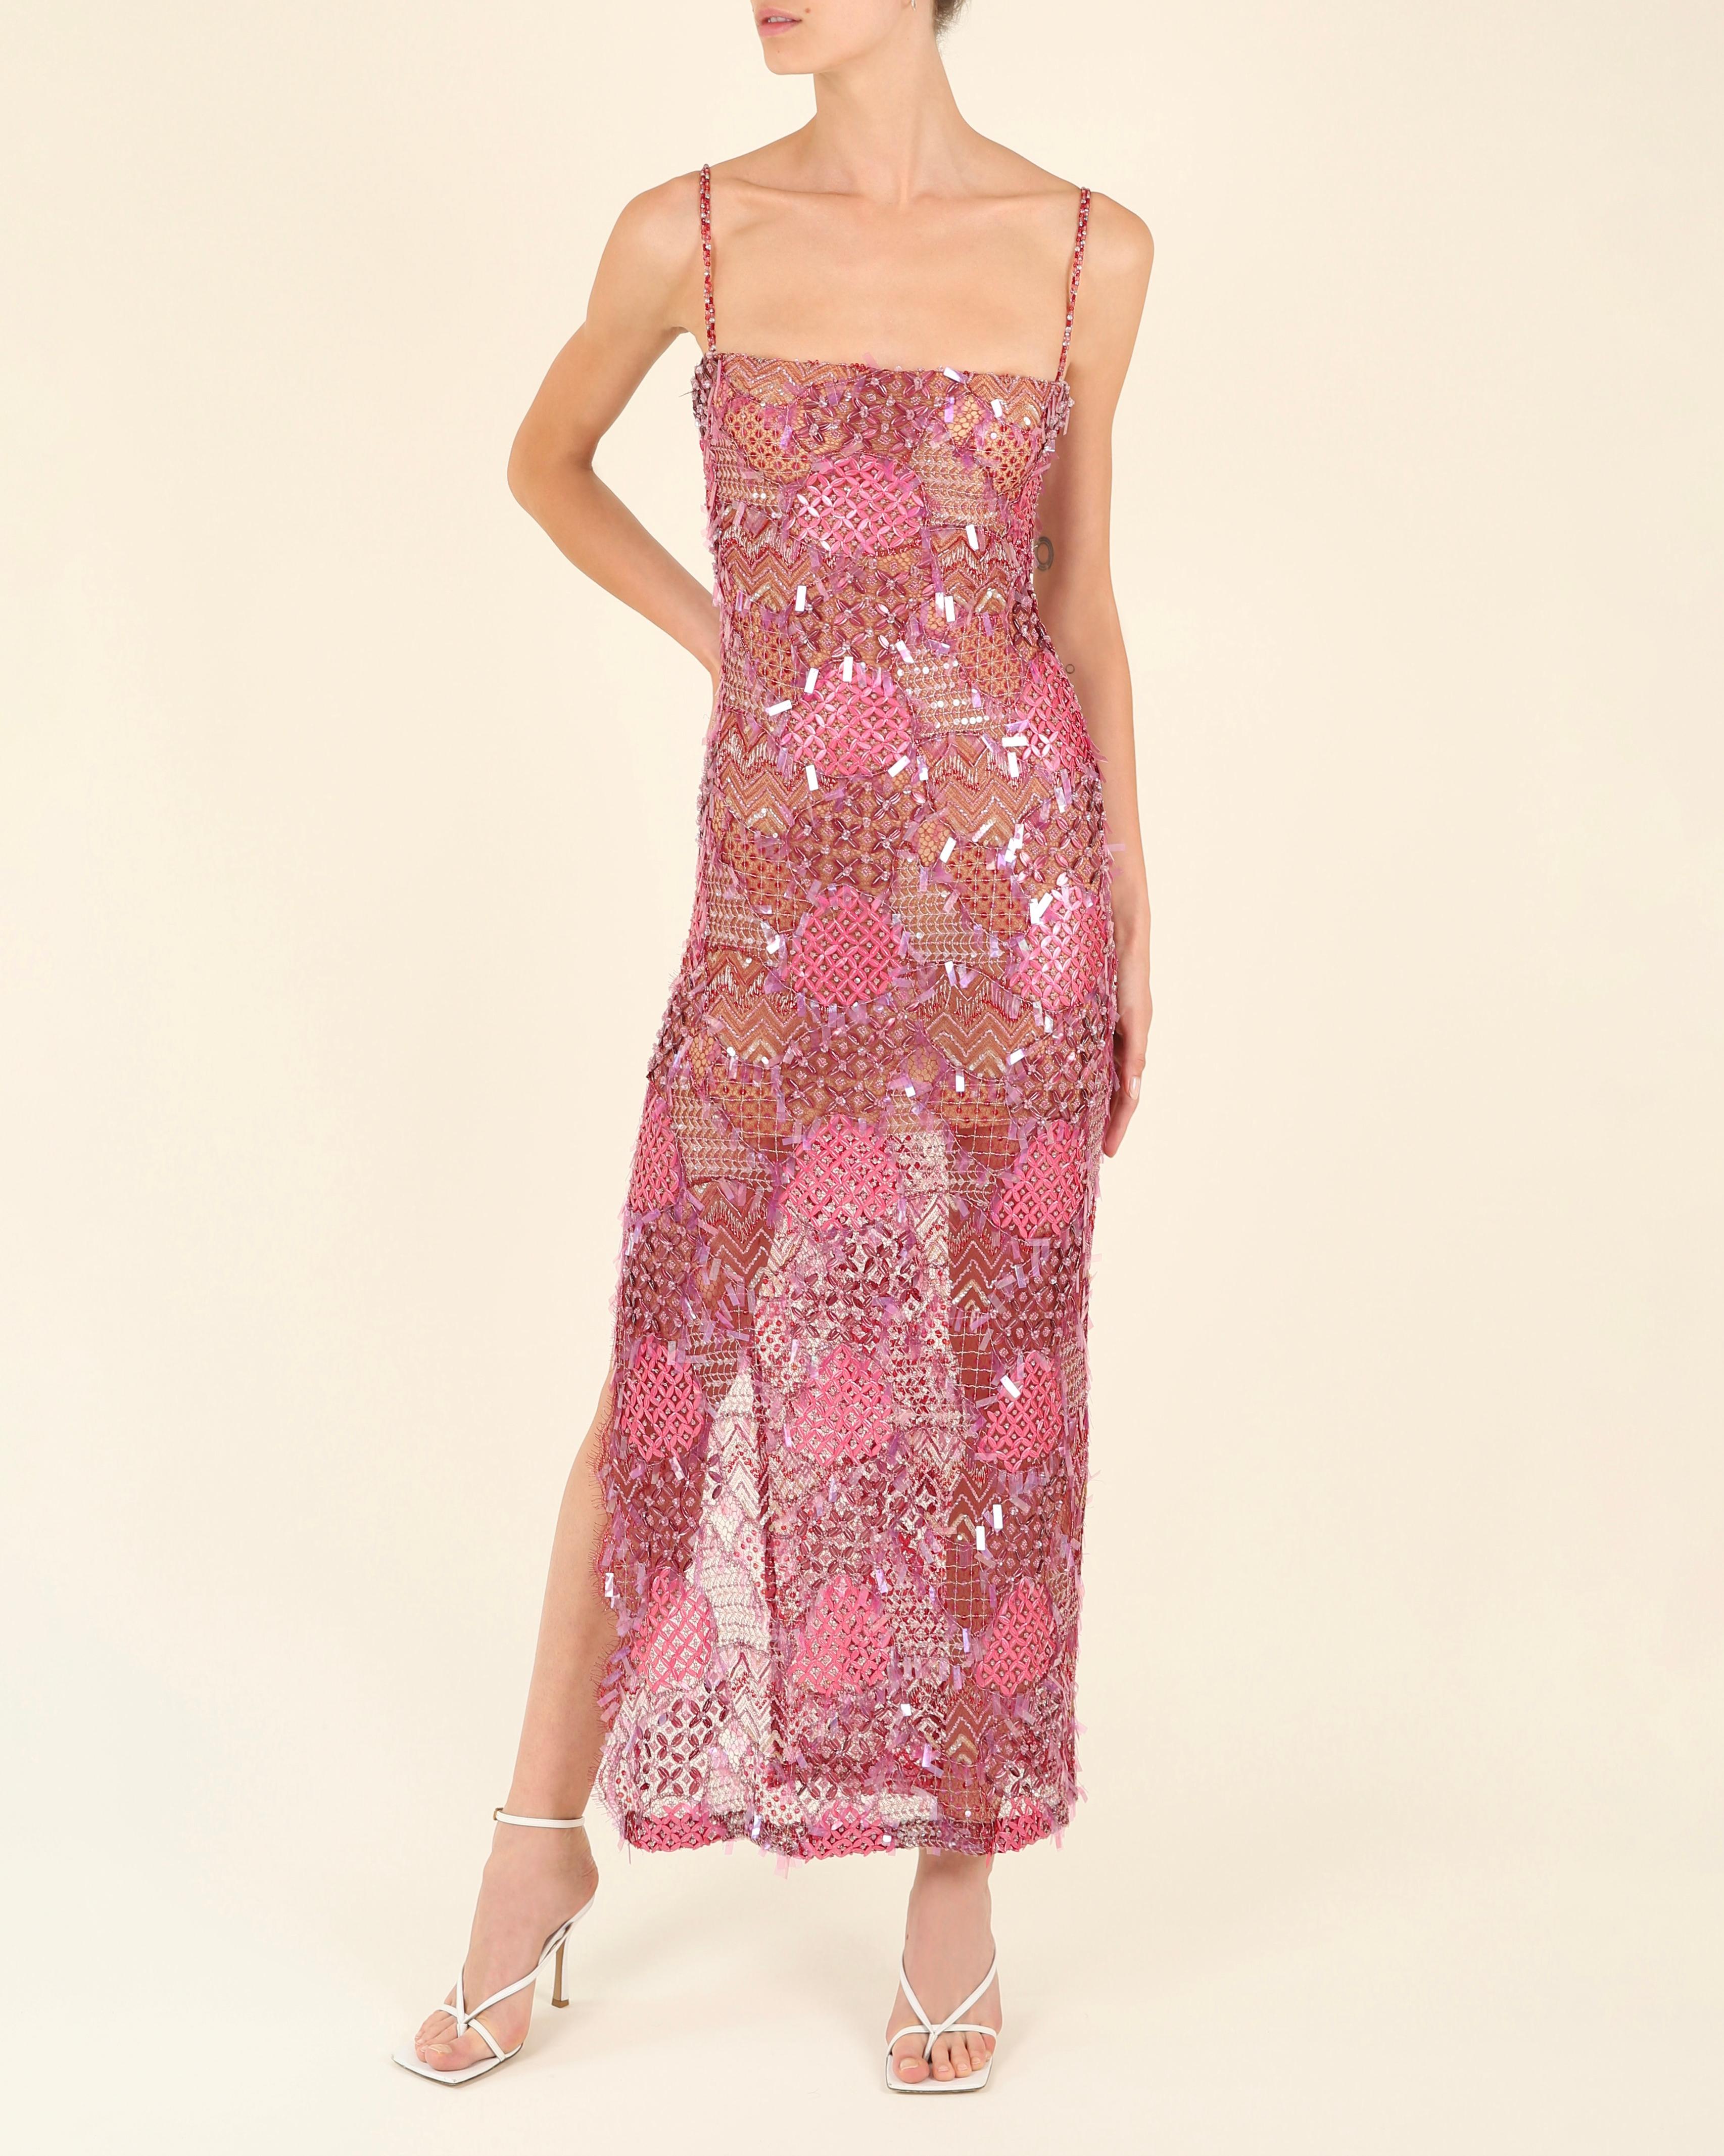 Loris Azzaro couture pink embellished sequin beaded sheer slit bustier dress XS For Sale 2